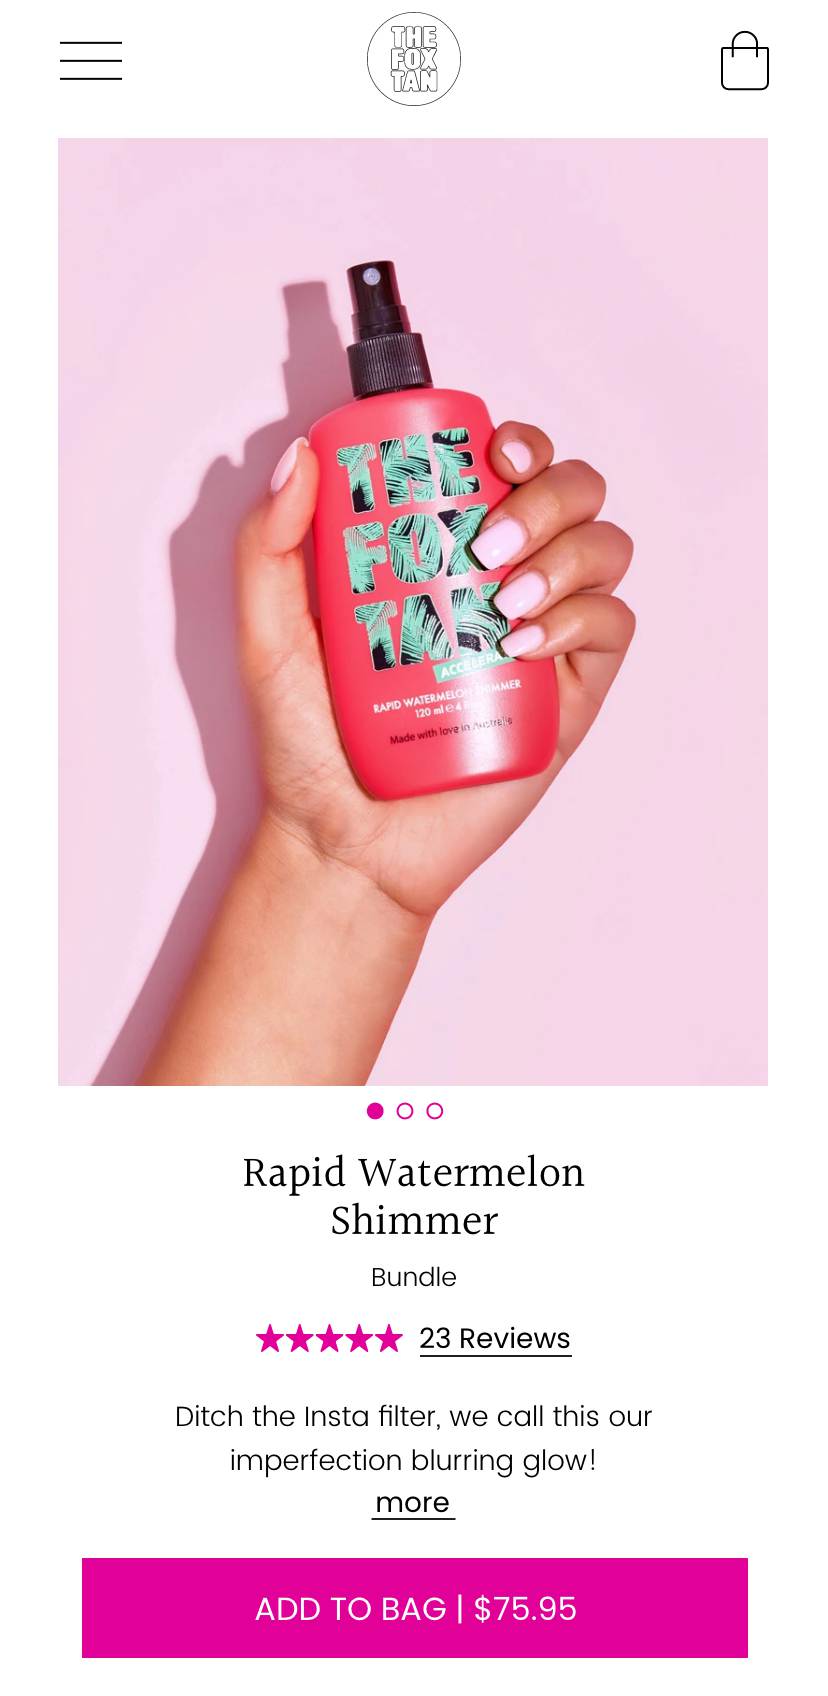 Rapid watermelon shimmer product page mobile view